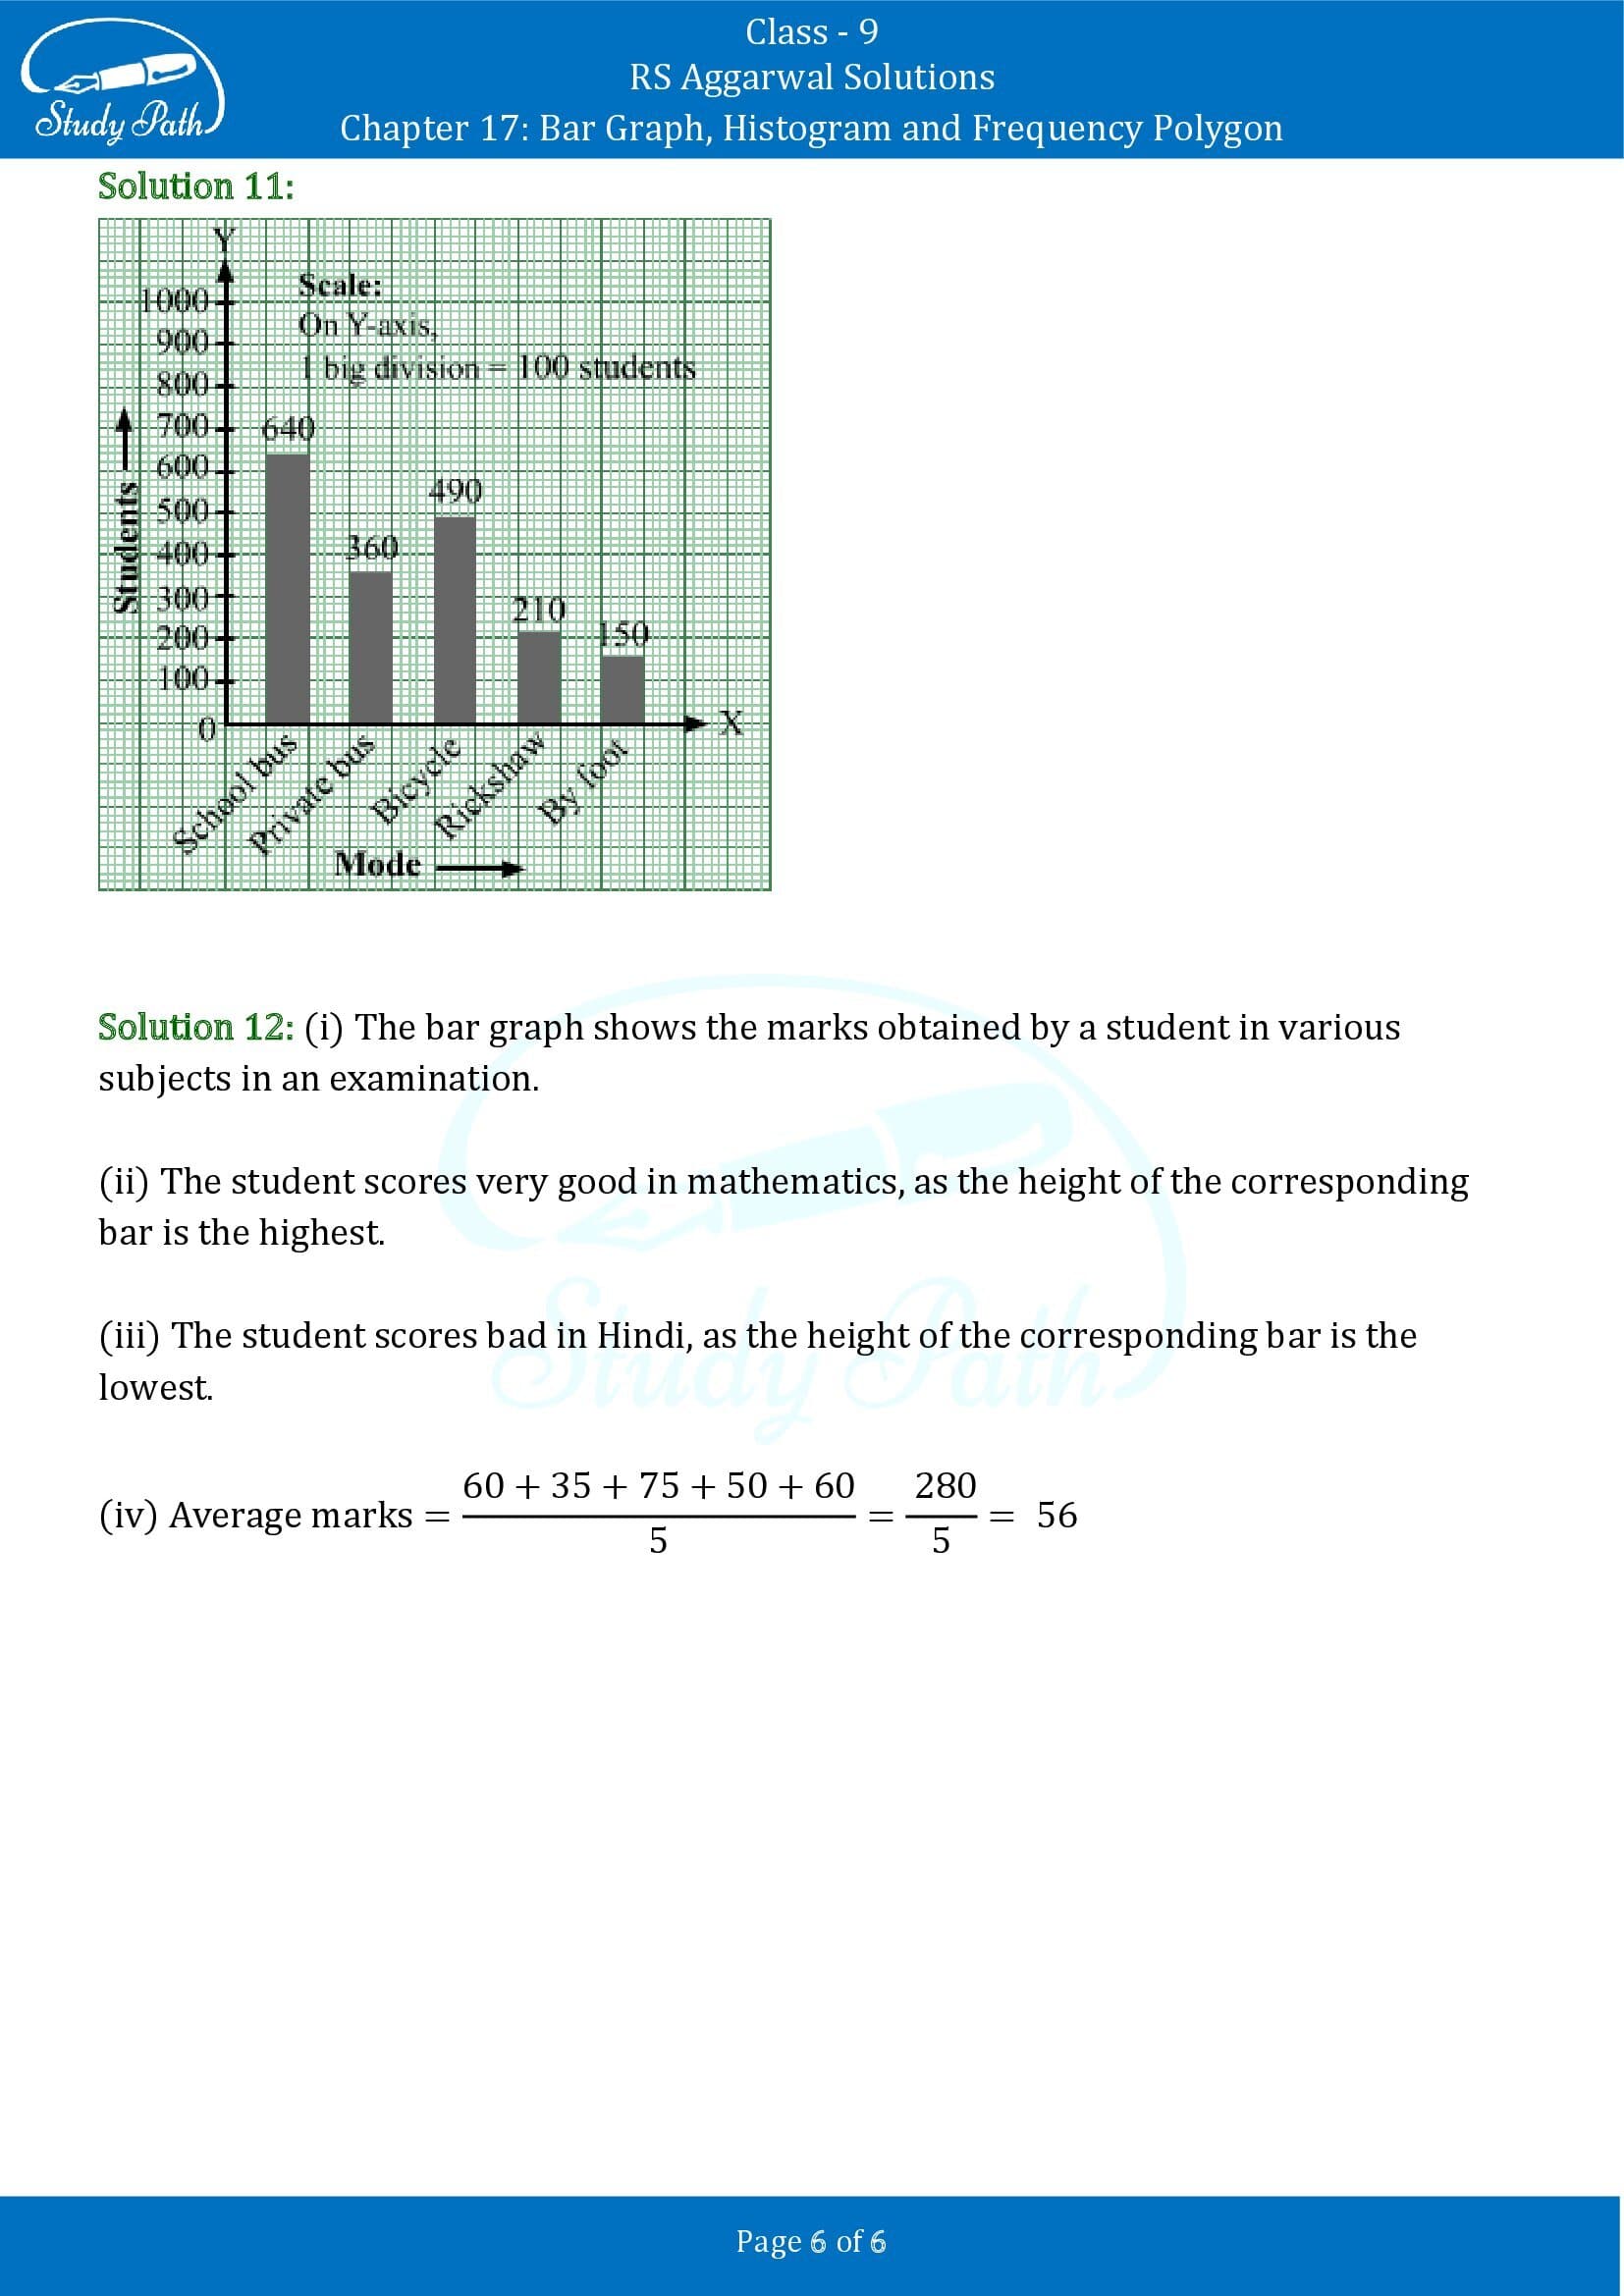 RS Aggarwal Solutions Class 9 Chapter 17 Bar Graph Histogram and Frequency Polygon Exercise 17A 00006